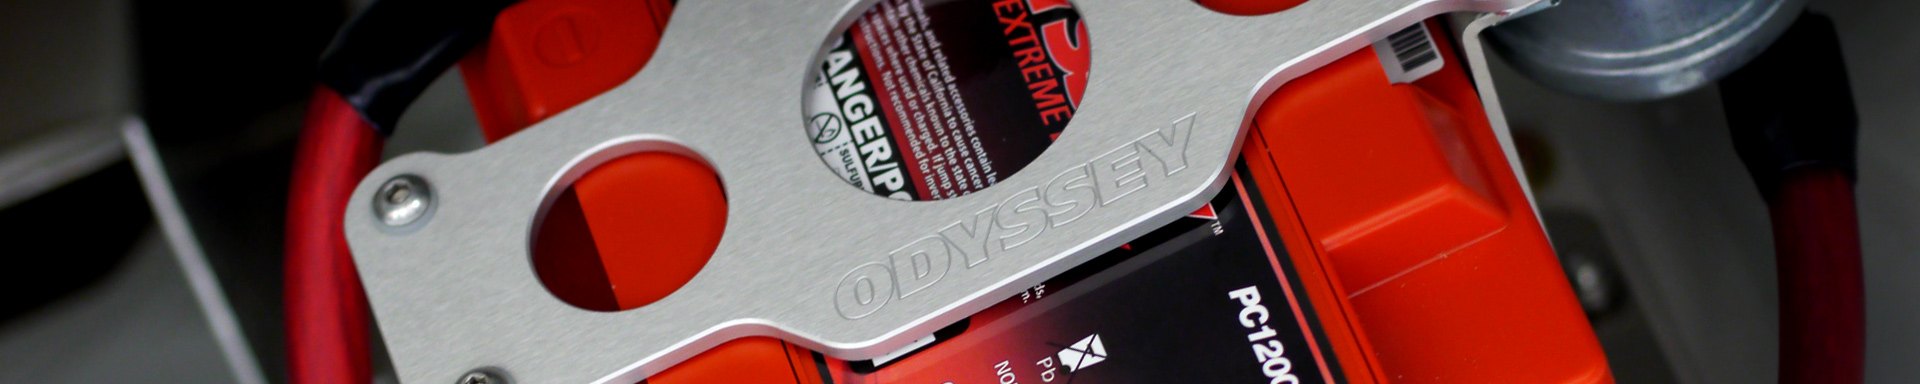 Odyssey Battery Charging Systems